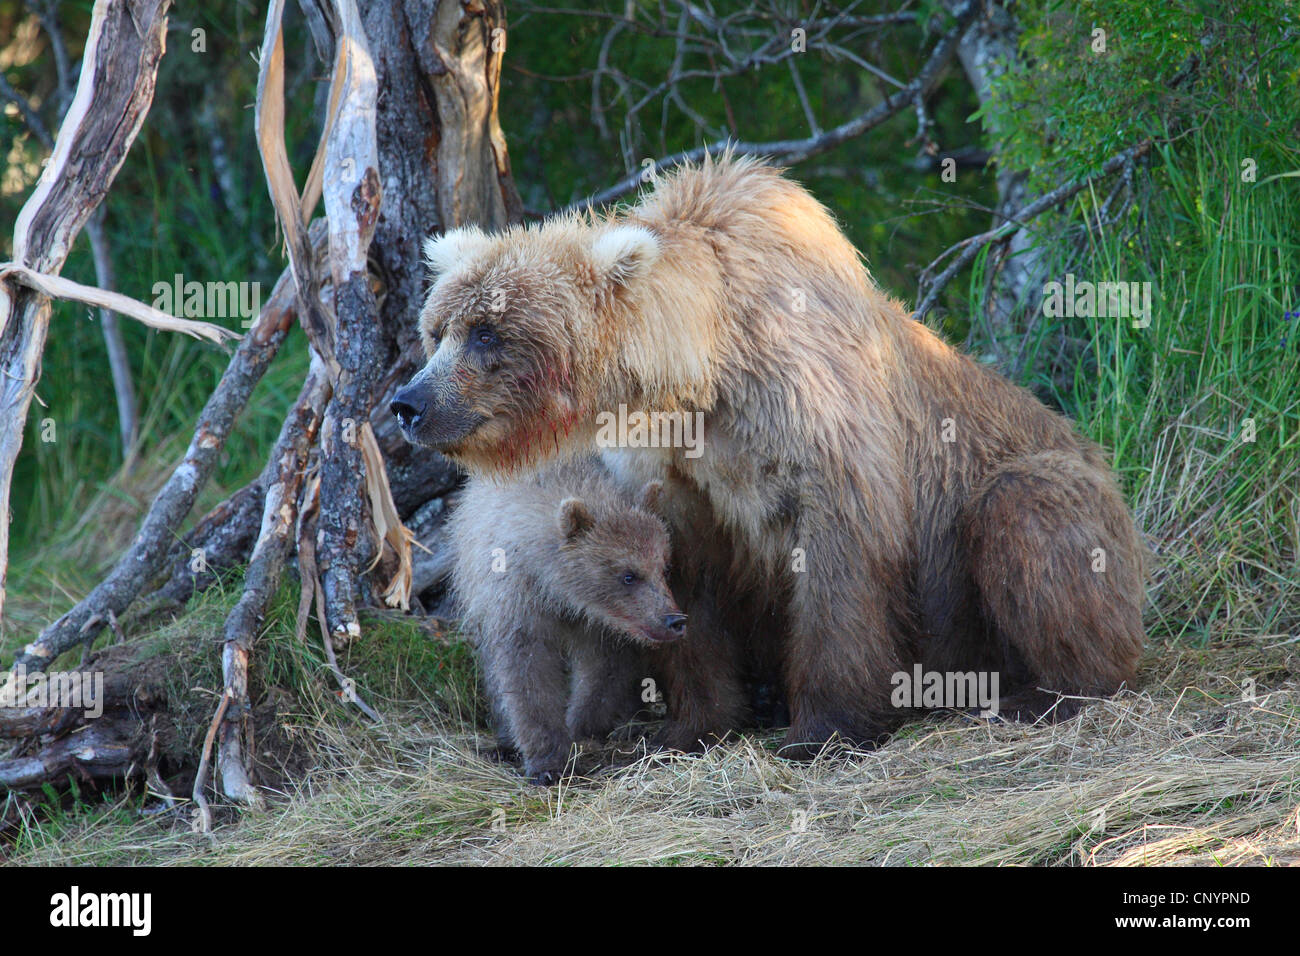 brown bear, grizzly bear, grizzly (Ursus arctos horribilis), female sitting at a riverside with a juvenile, USA, Alaska Stock Photo